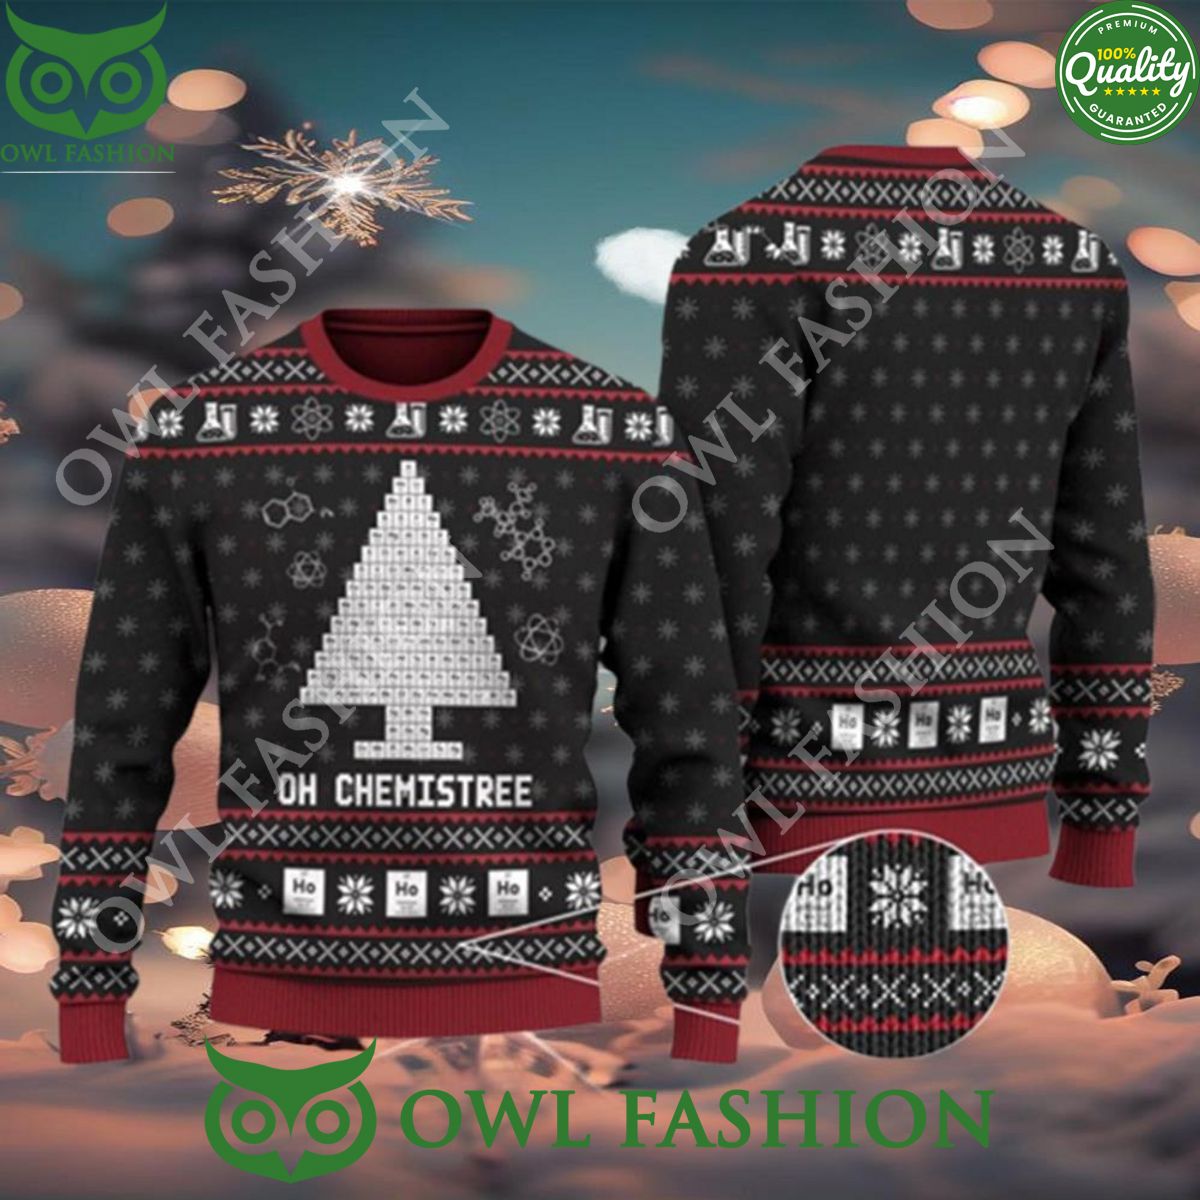 Oh Chemistree Knit Ugly Christmas Sweater Jumper I am in love with your dress